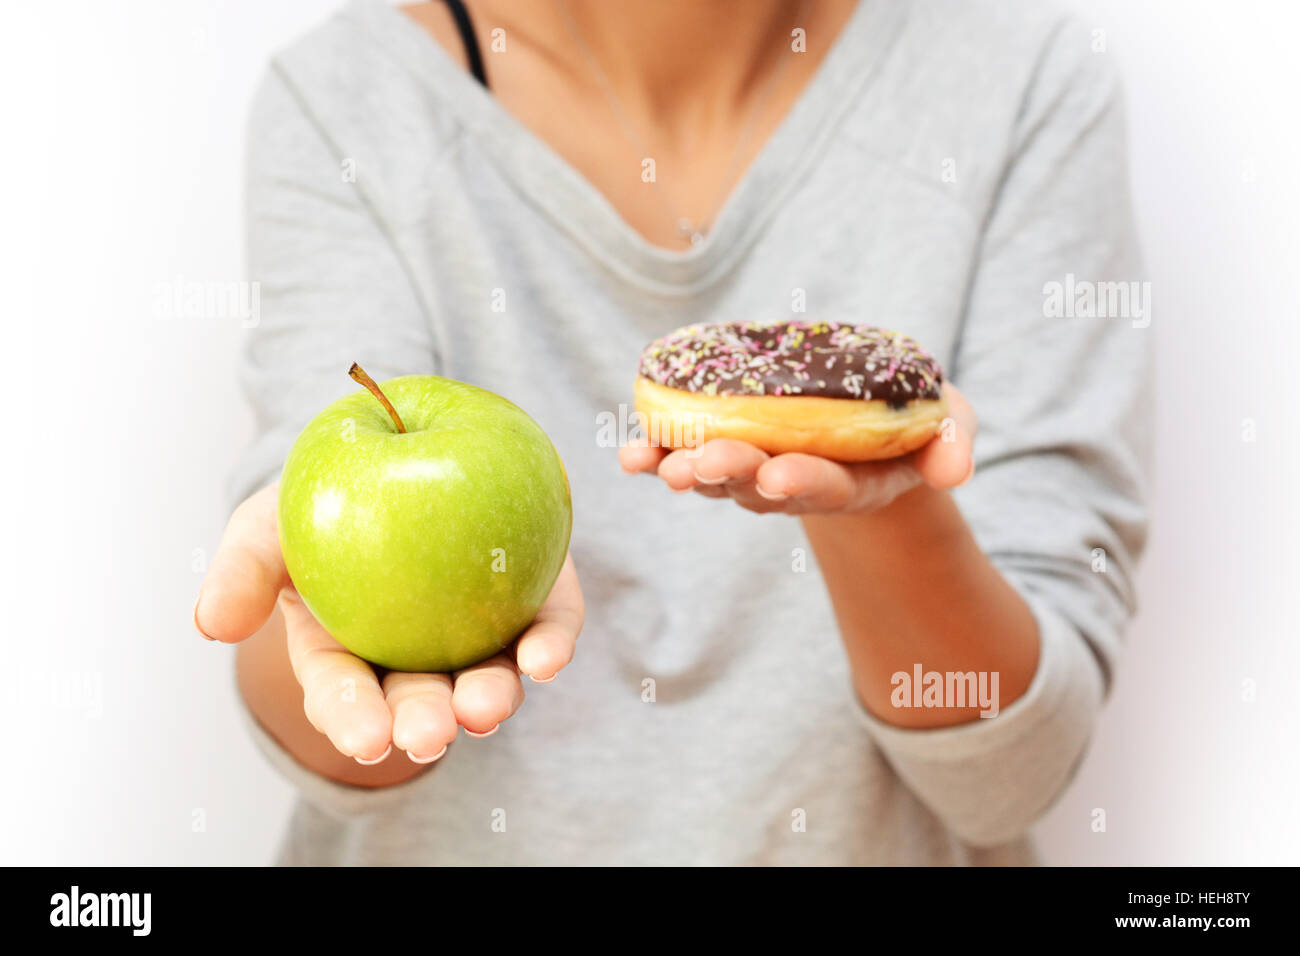 Healthy lifestyle or nutrition concept with young woman holding in hands an green apple and a donut Stock Photo